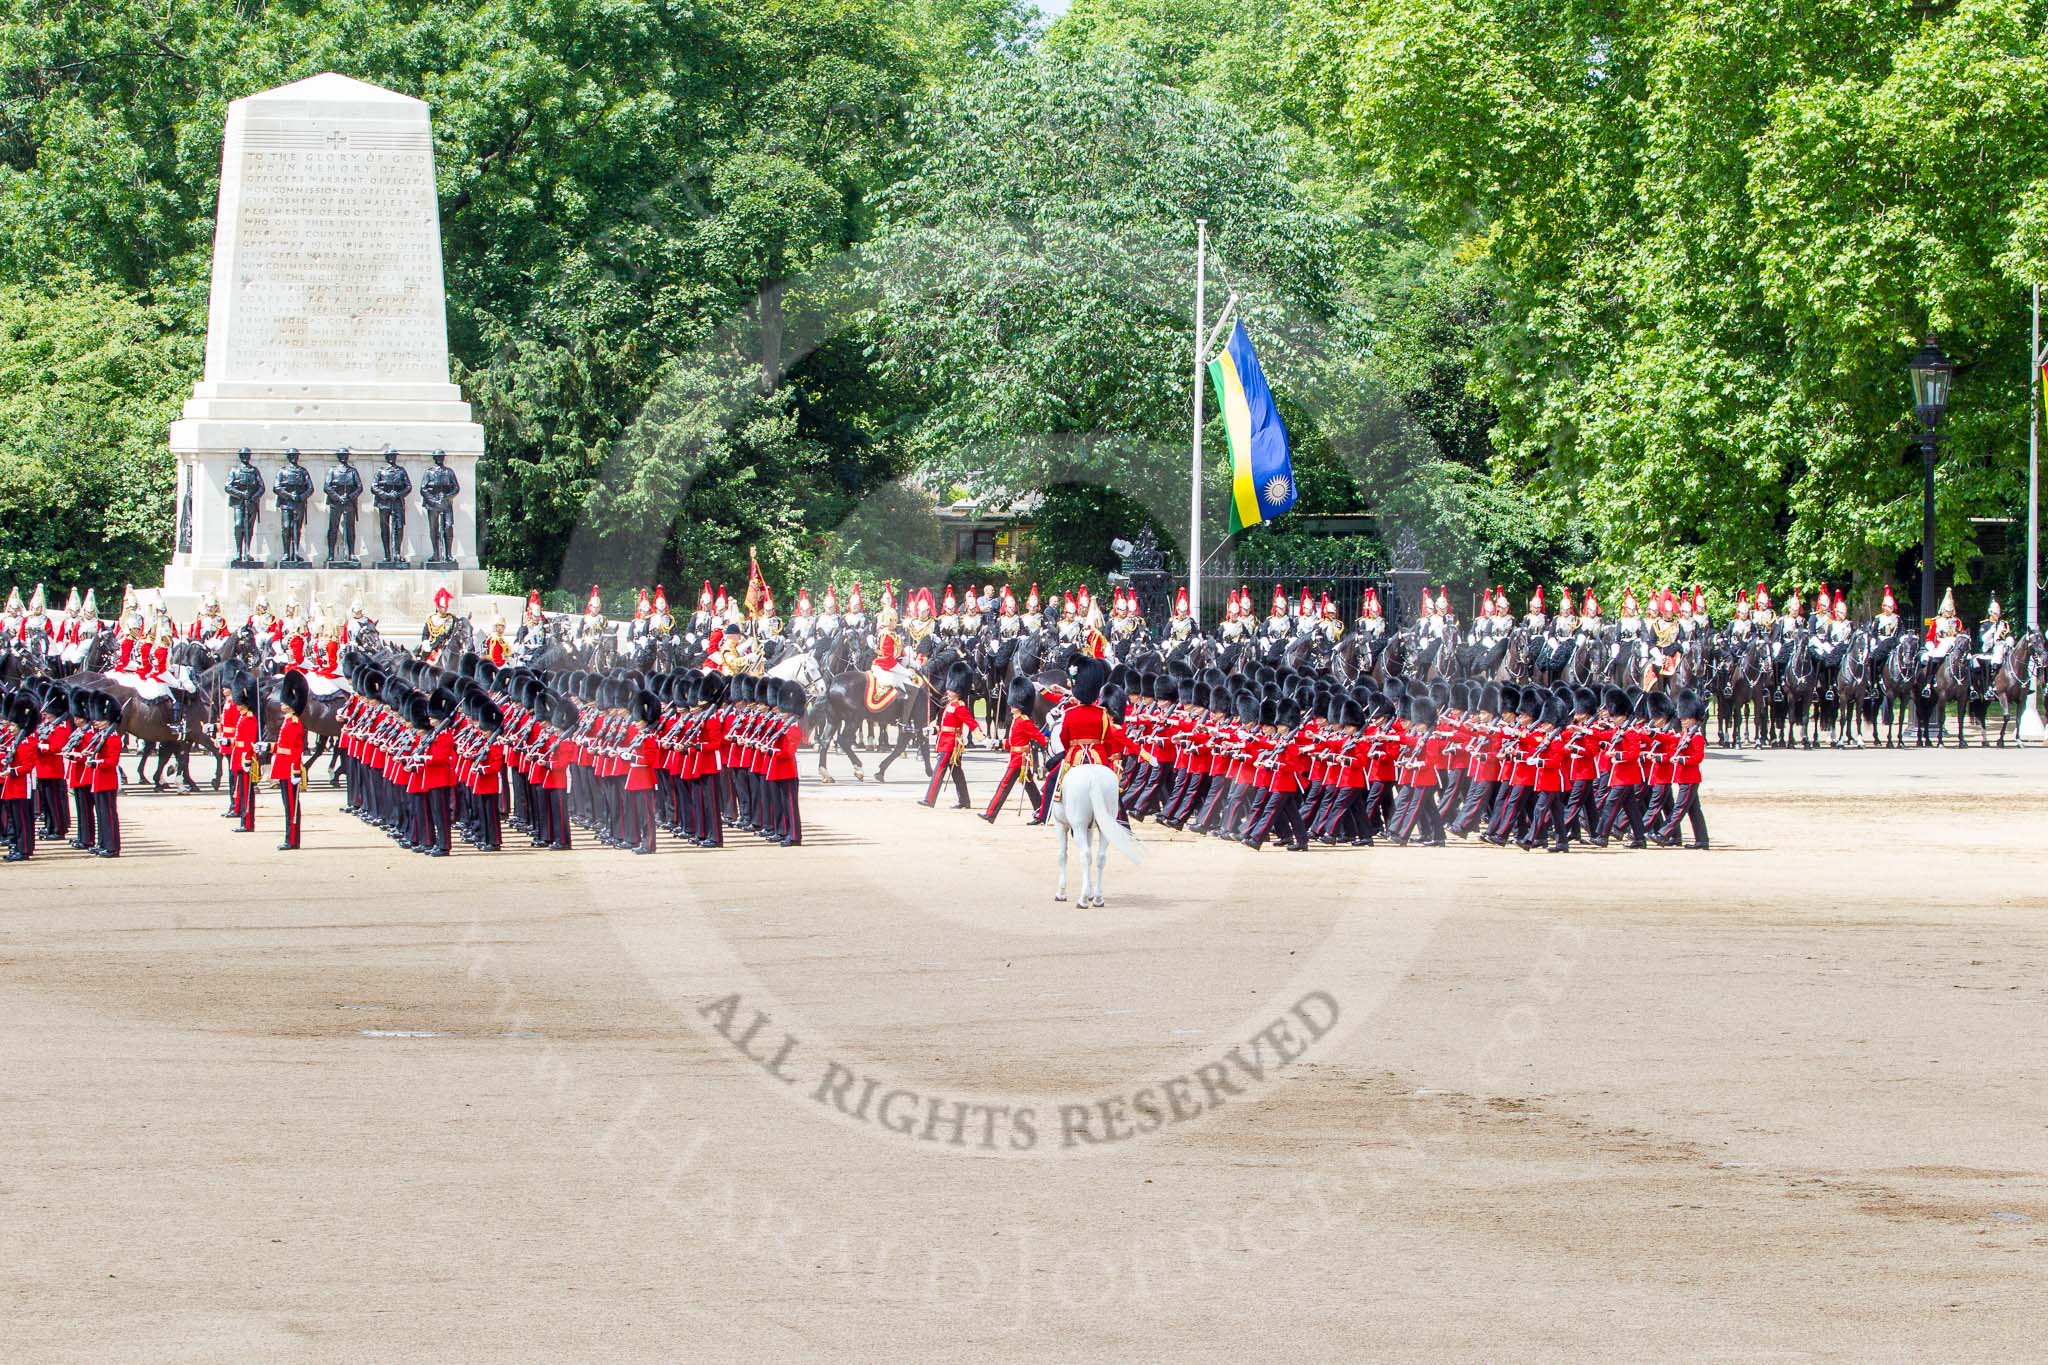 Trooping the Colour 2013: The six guards divisions have changed direction. Behind them, the Household Cavalry is leaving their position to march off. Image #773, 15 June 2013 12:05 Horse Guards Parade, London, UK